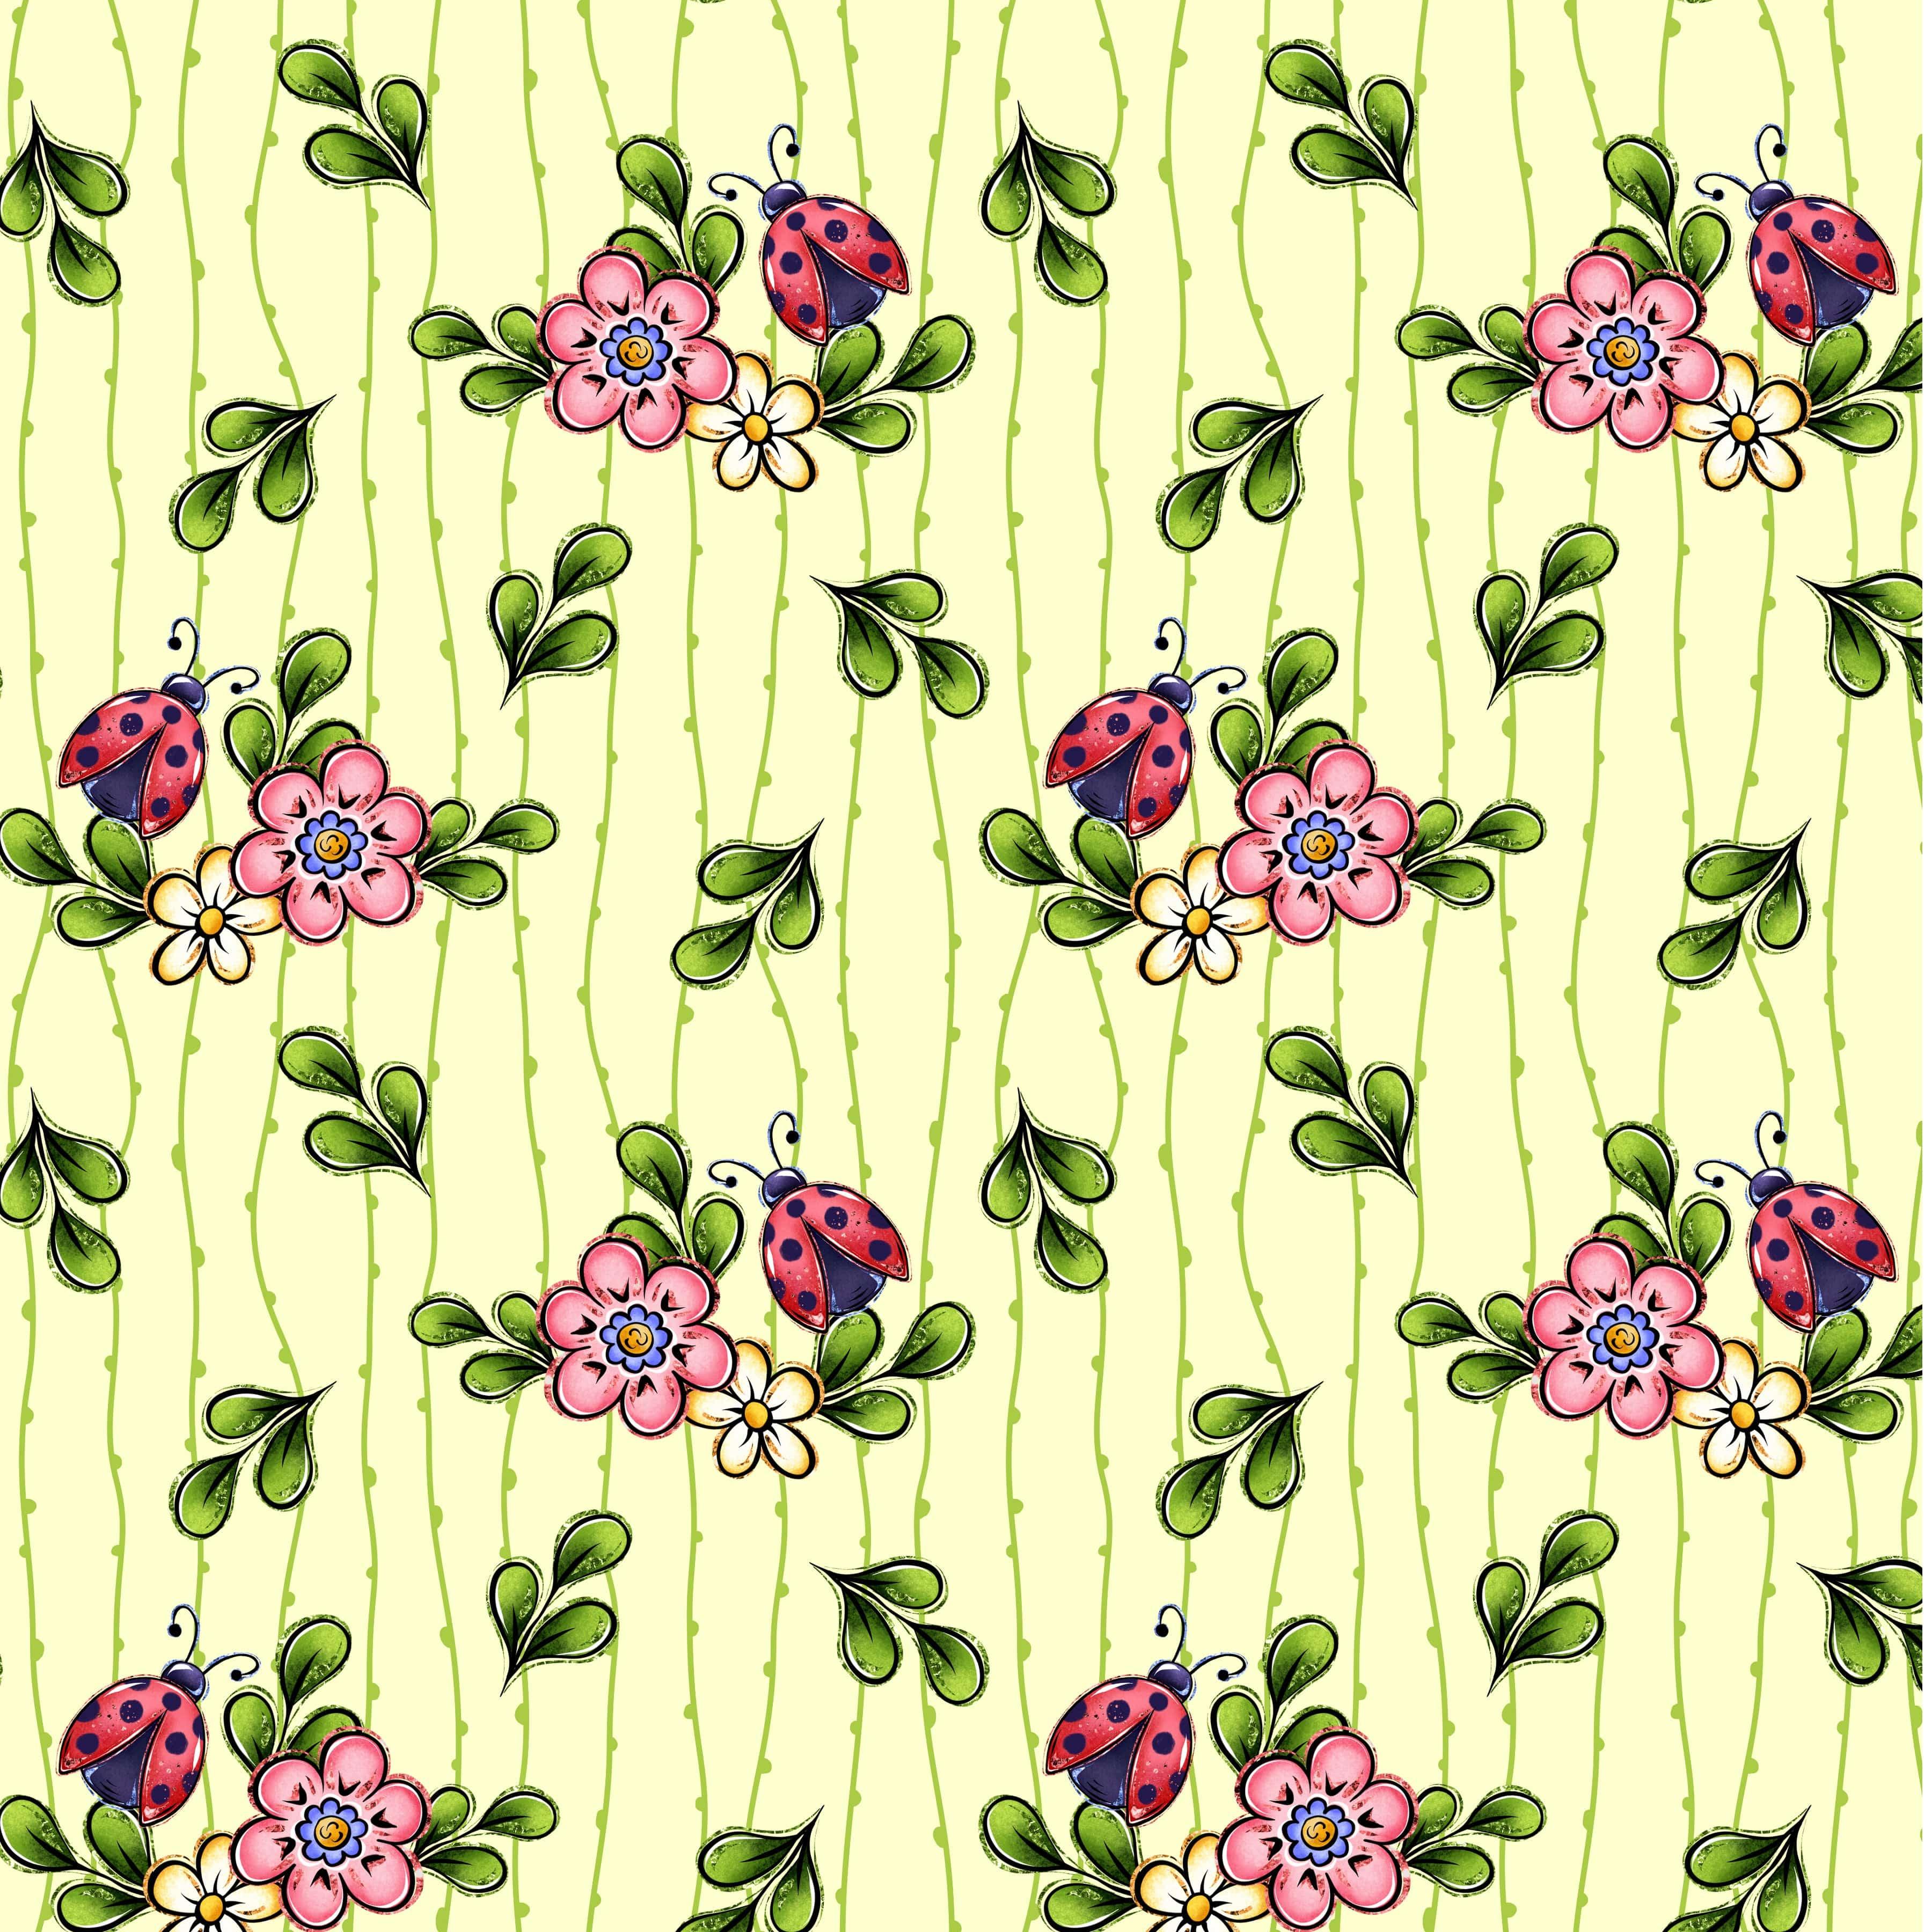 Phantasia Design's Frogs In The Morass Collection Frogs & Mushrooms 12 x 12 Double-Sided Scrapbook Paper by SSC Designs - Scrapbook Supply Companies